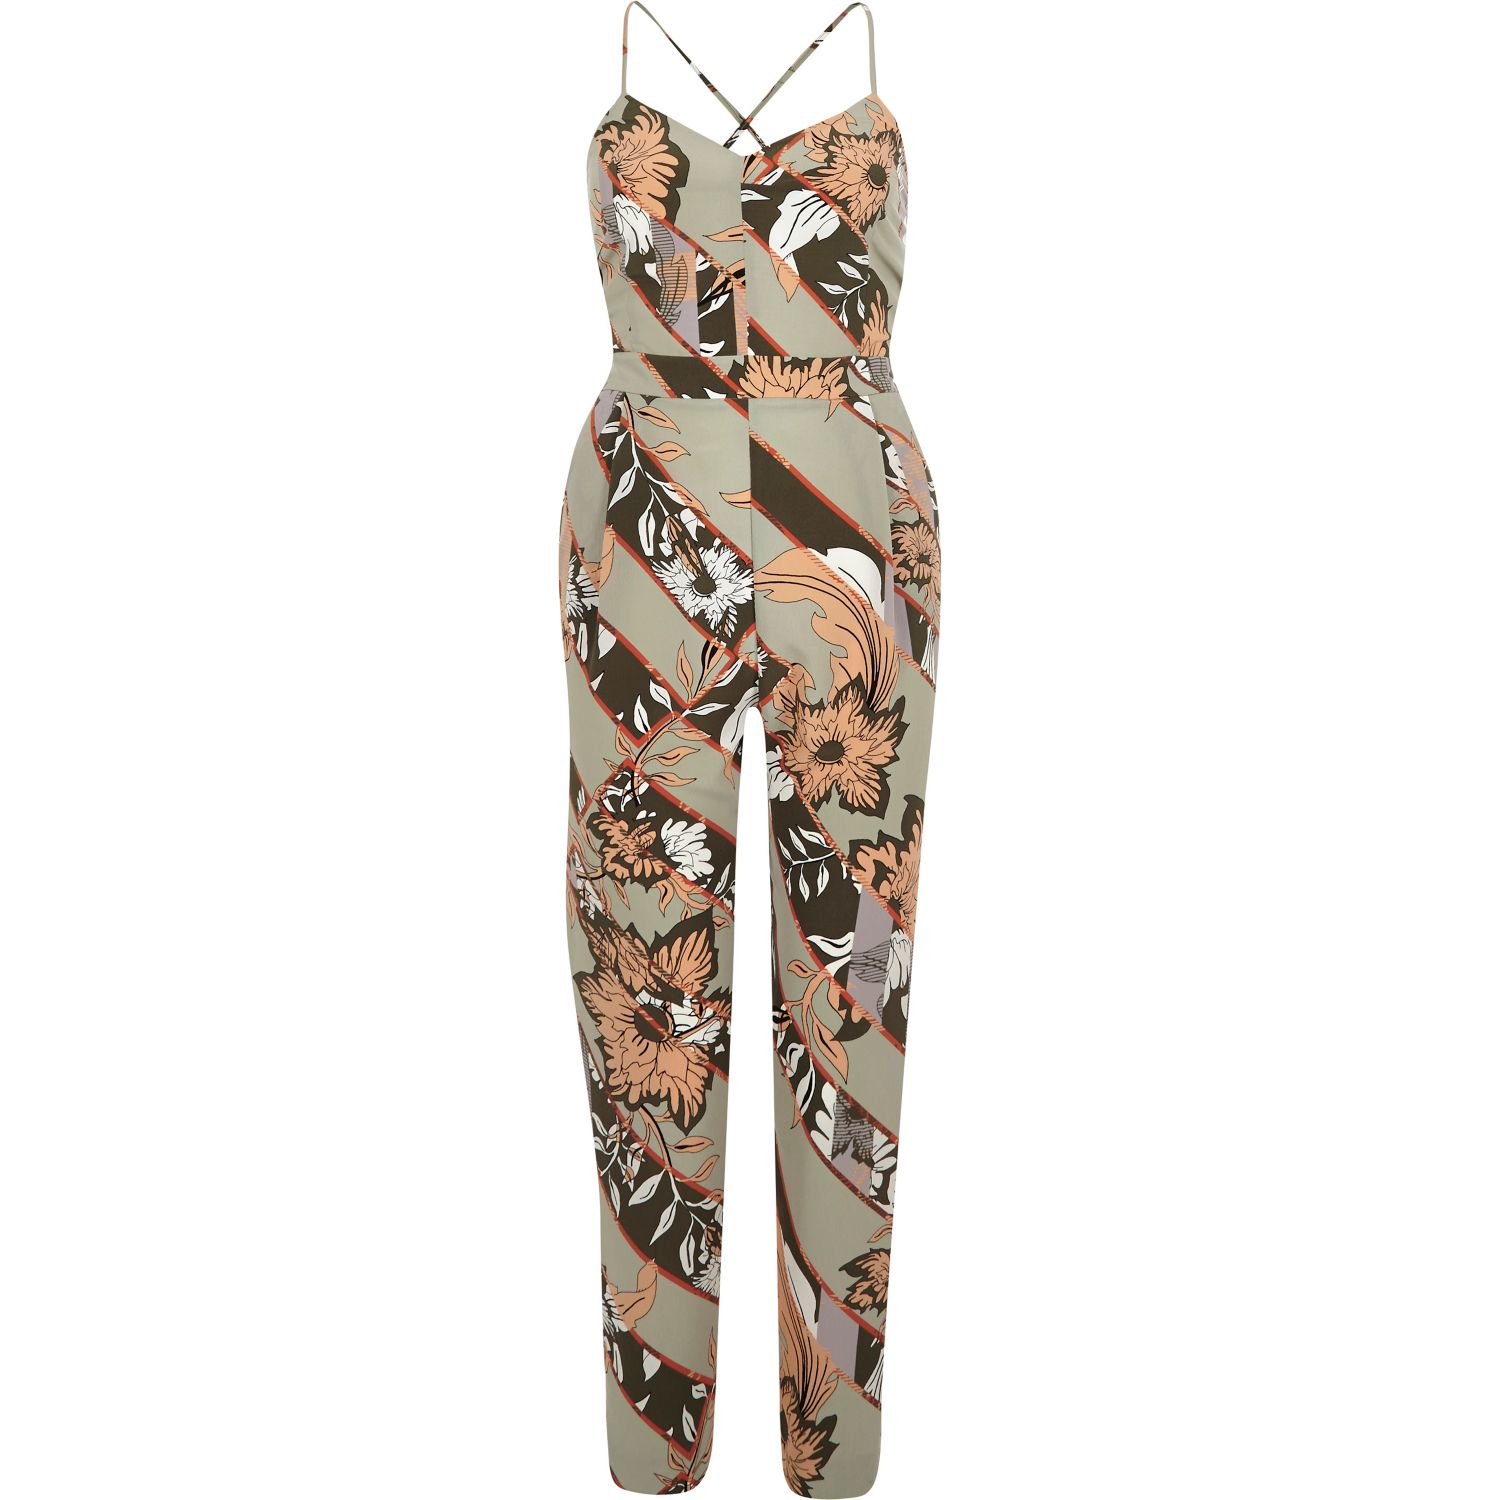 Lyst - River island Green Floral Print Tapered Jumpsuit in Green